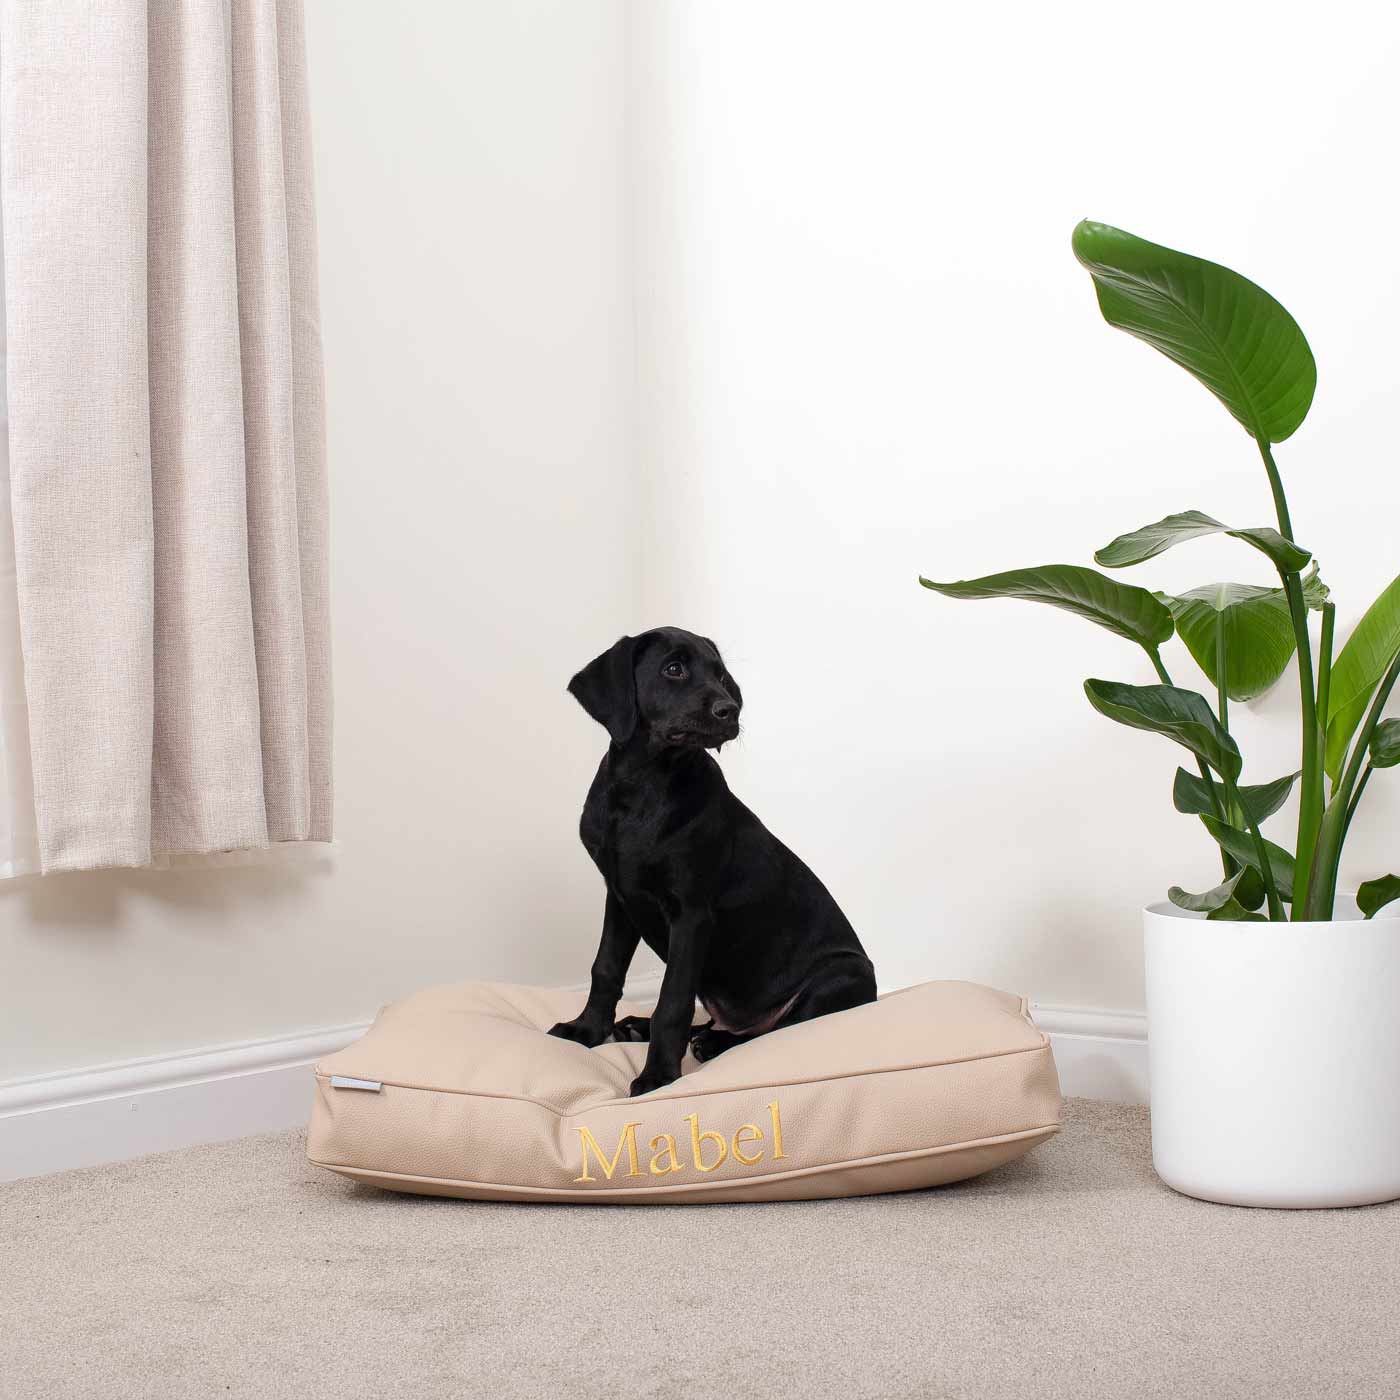 Luxury Dog Cushion in Rhino Tough Faux Leather in Sand, The Perfect Pet Bed Time Accessory! Available Now at Lords & Labradors